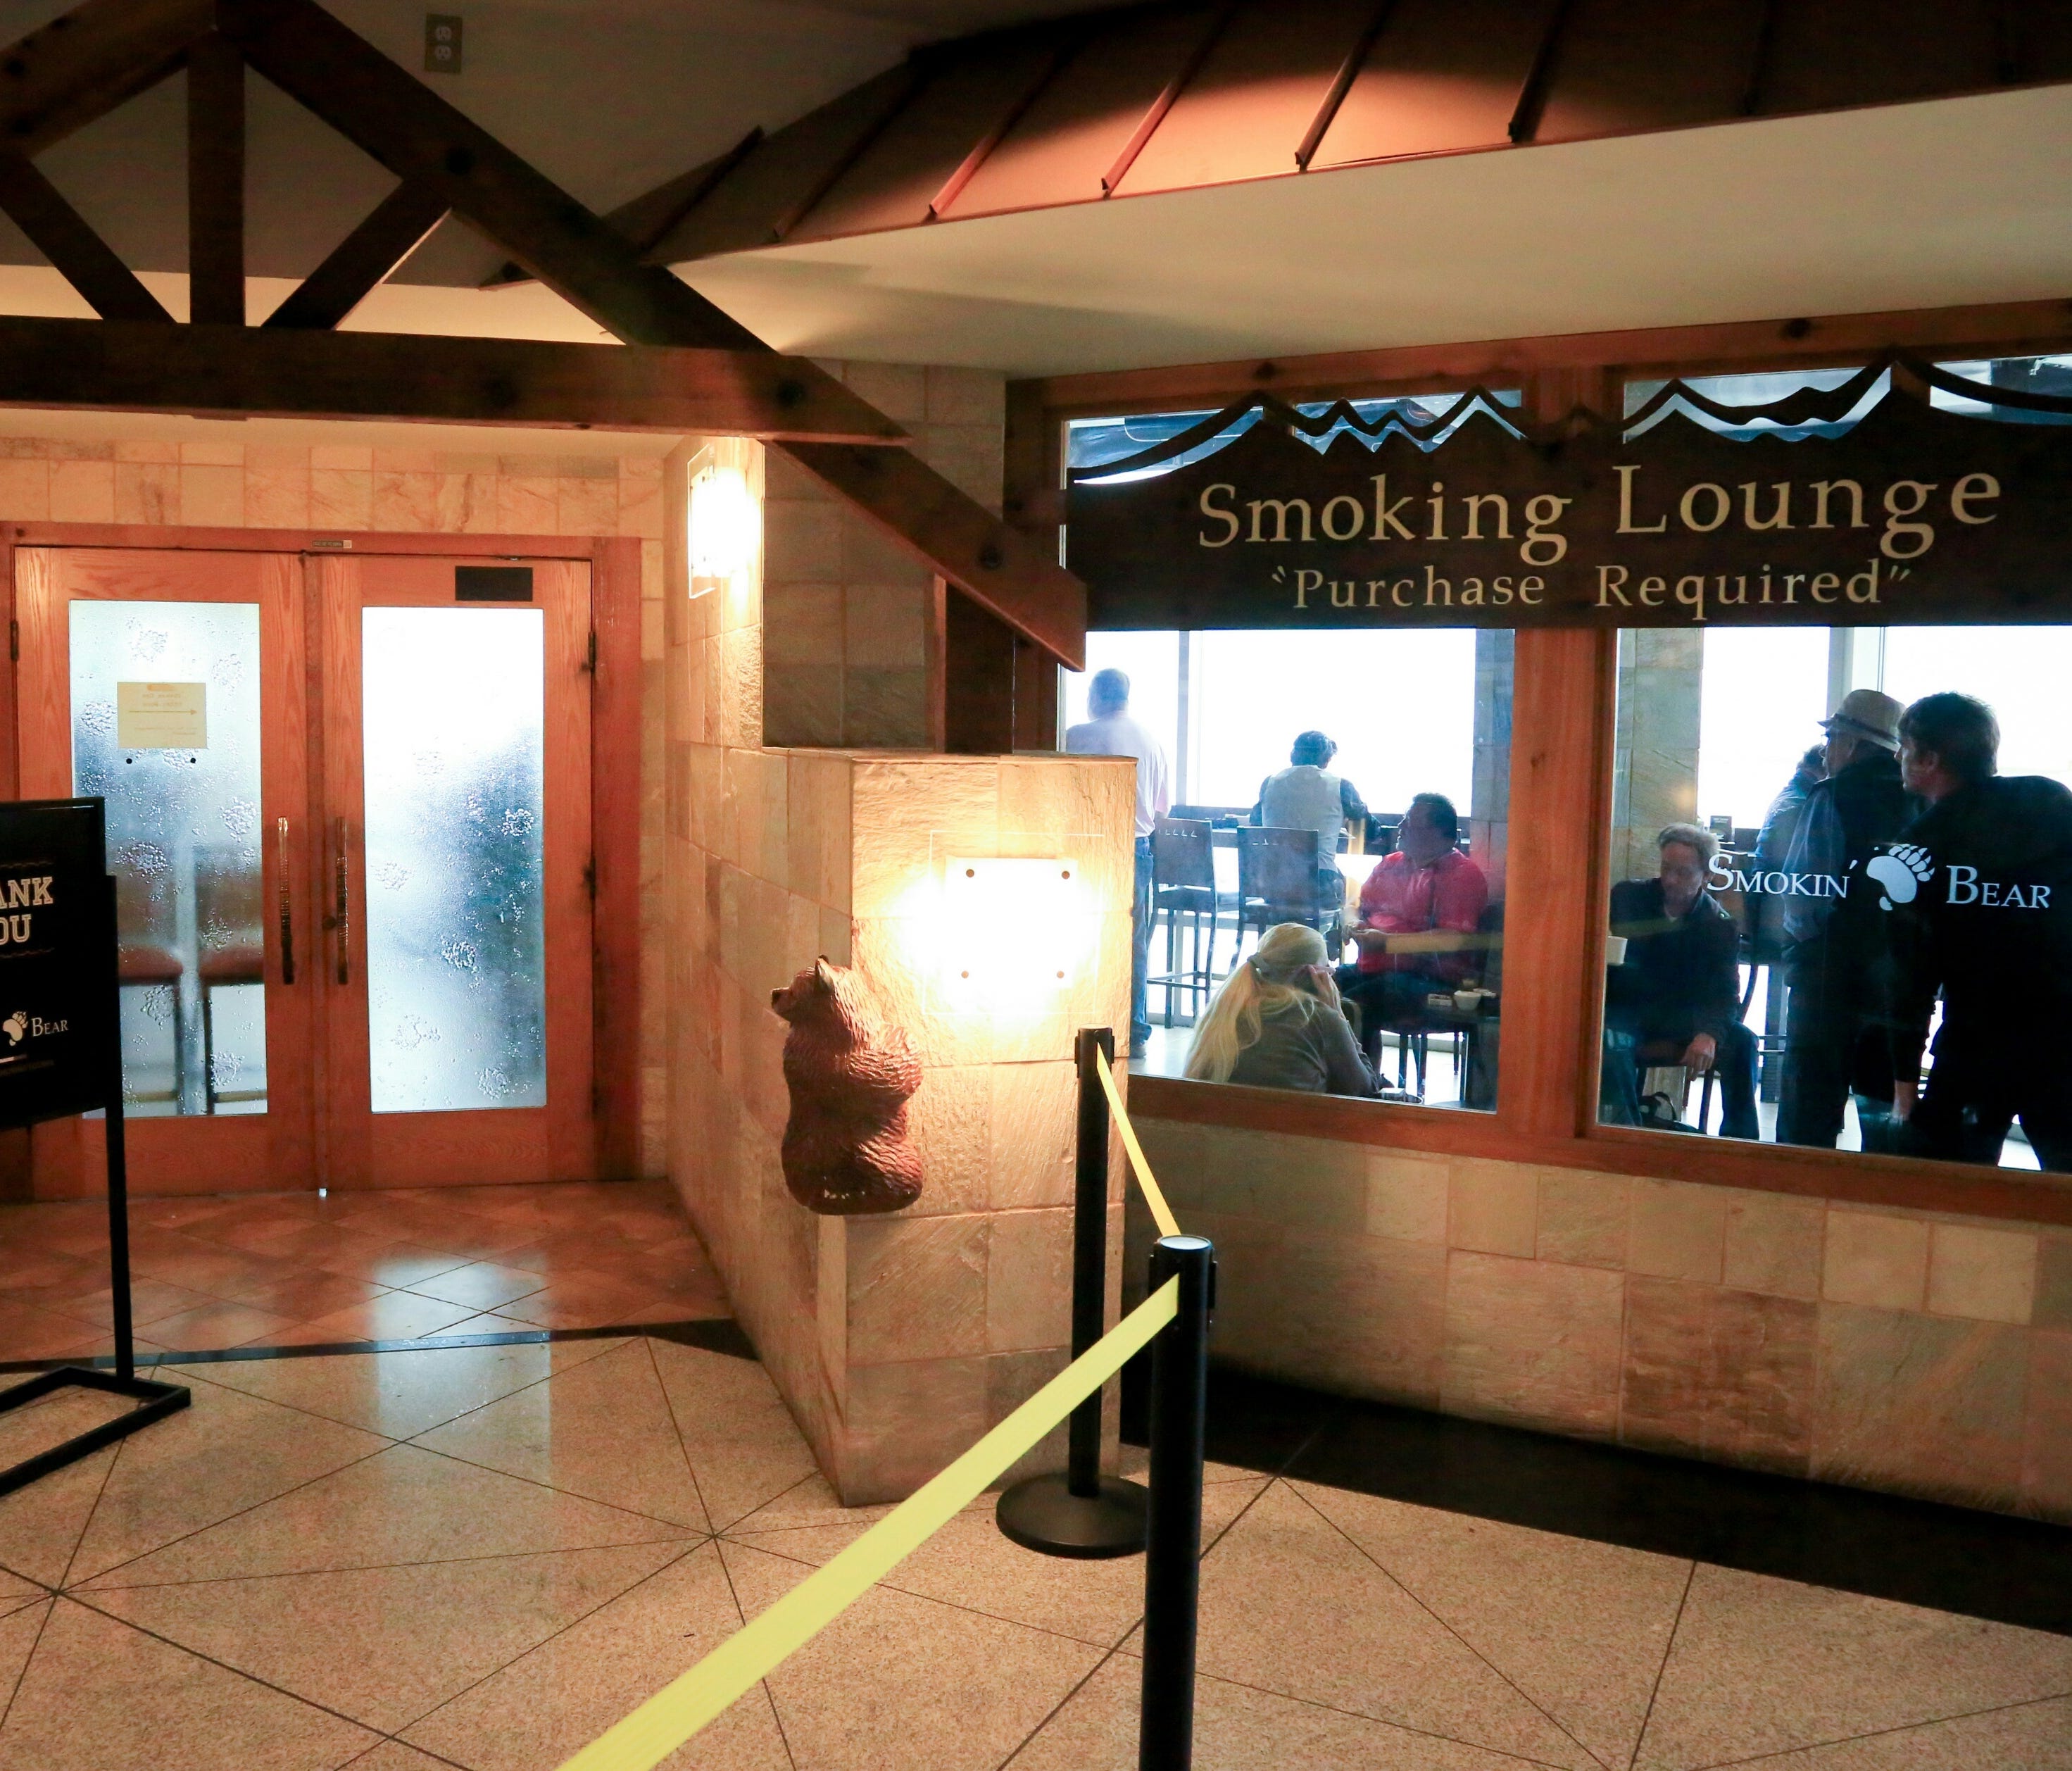 This file photo from September 2015 shows The Smokin' Bear Lodge Smoking Lounge at Denver International Airport, one of the smoking lounges that was then open at the airport.